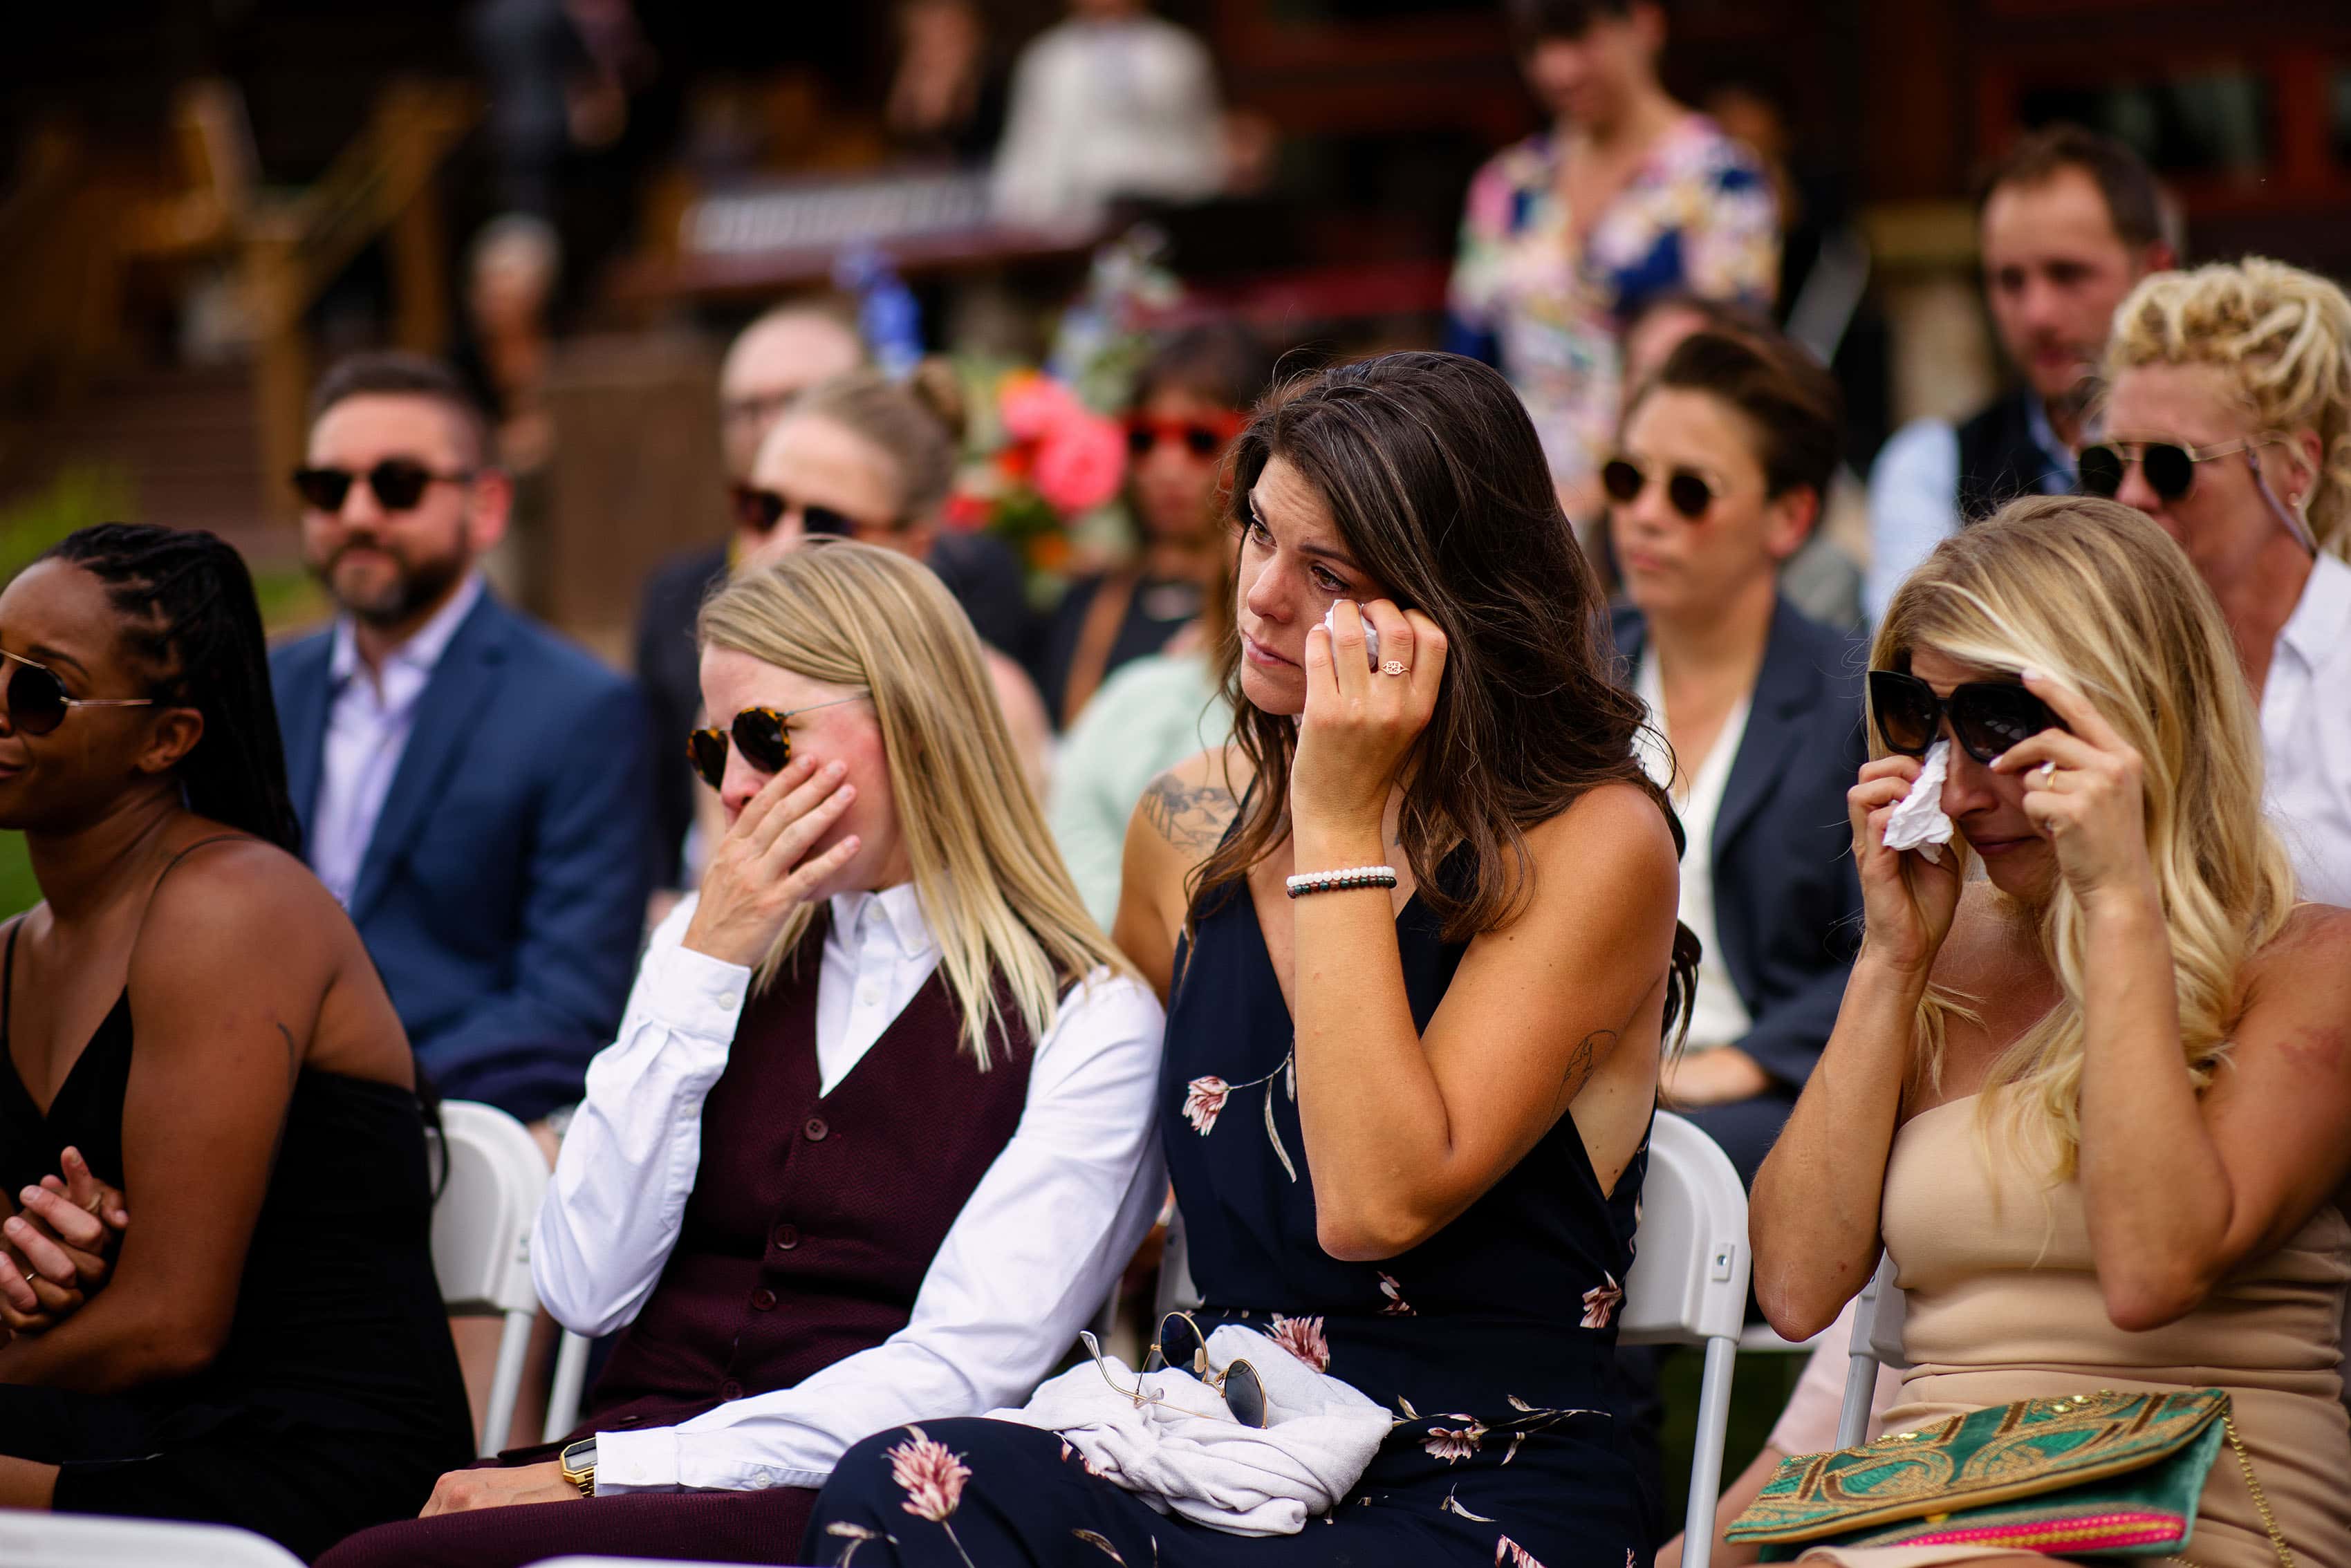 Guests ipe away tears during Anna and Cait’s ceremony at Breckenridge Nordic Center